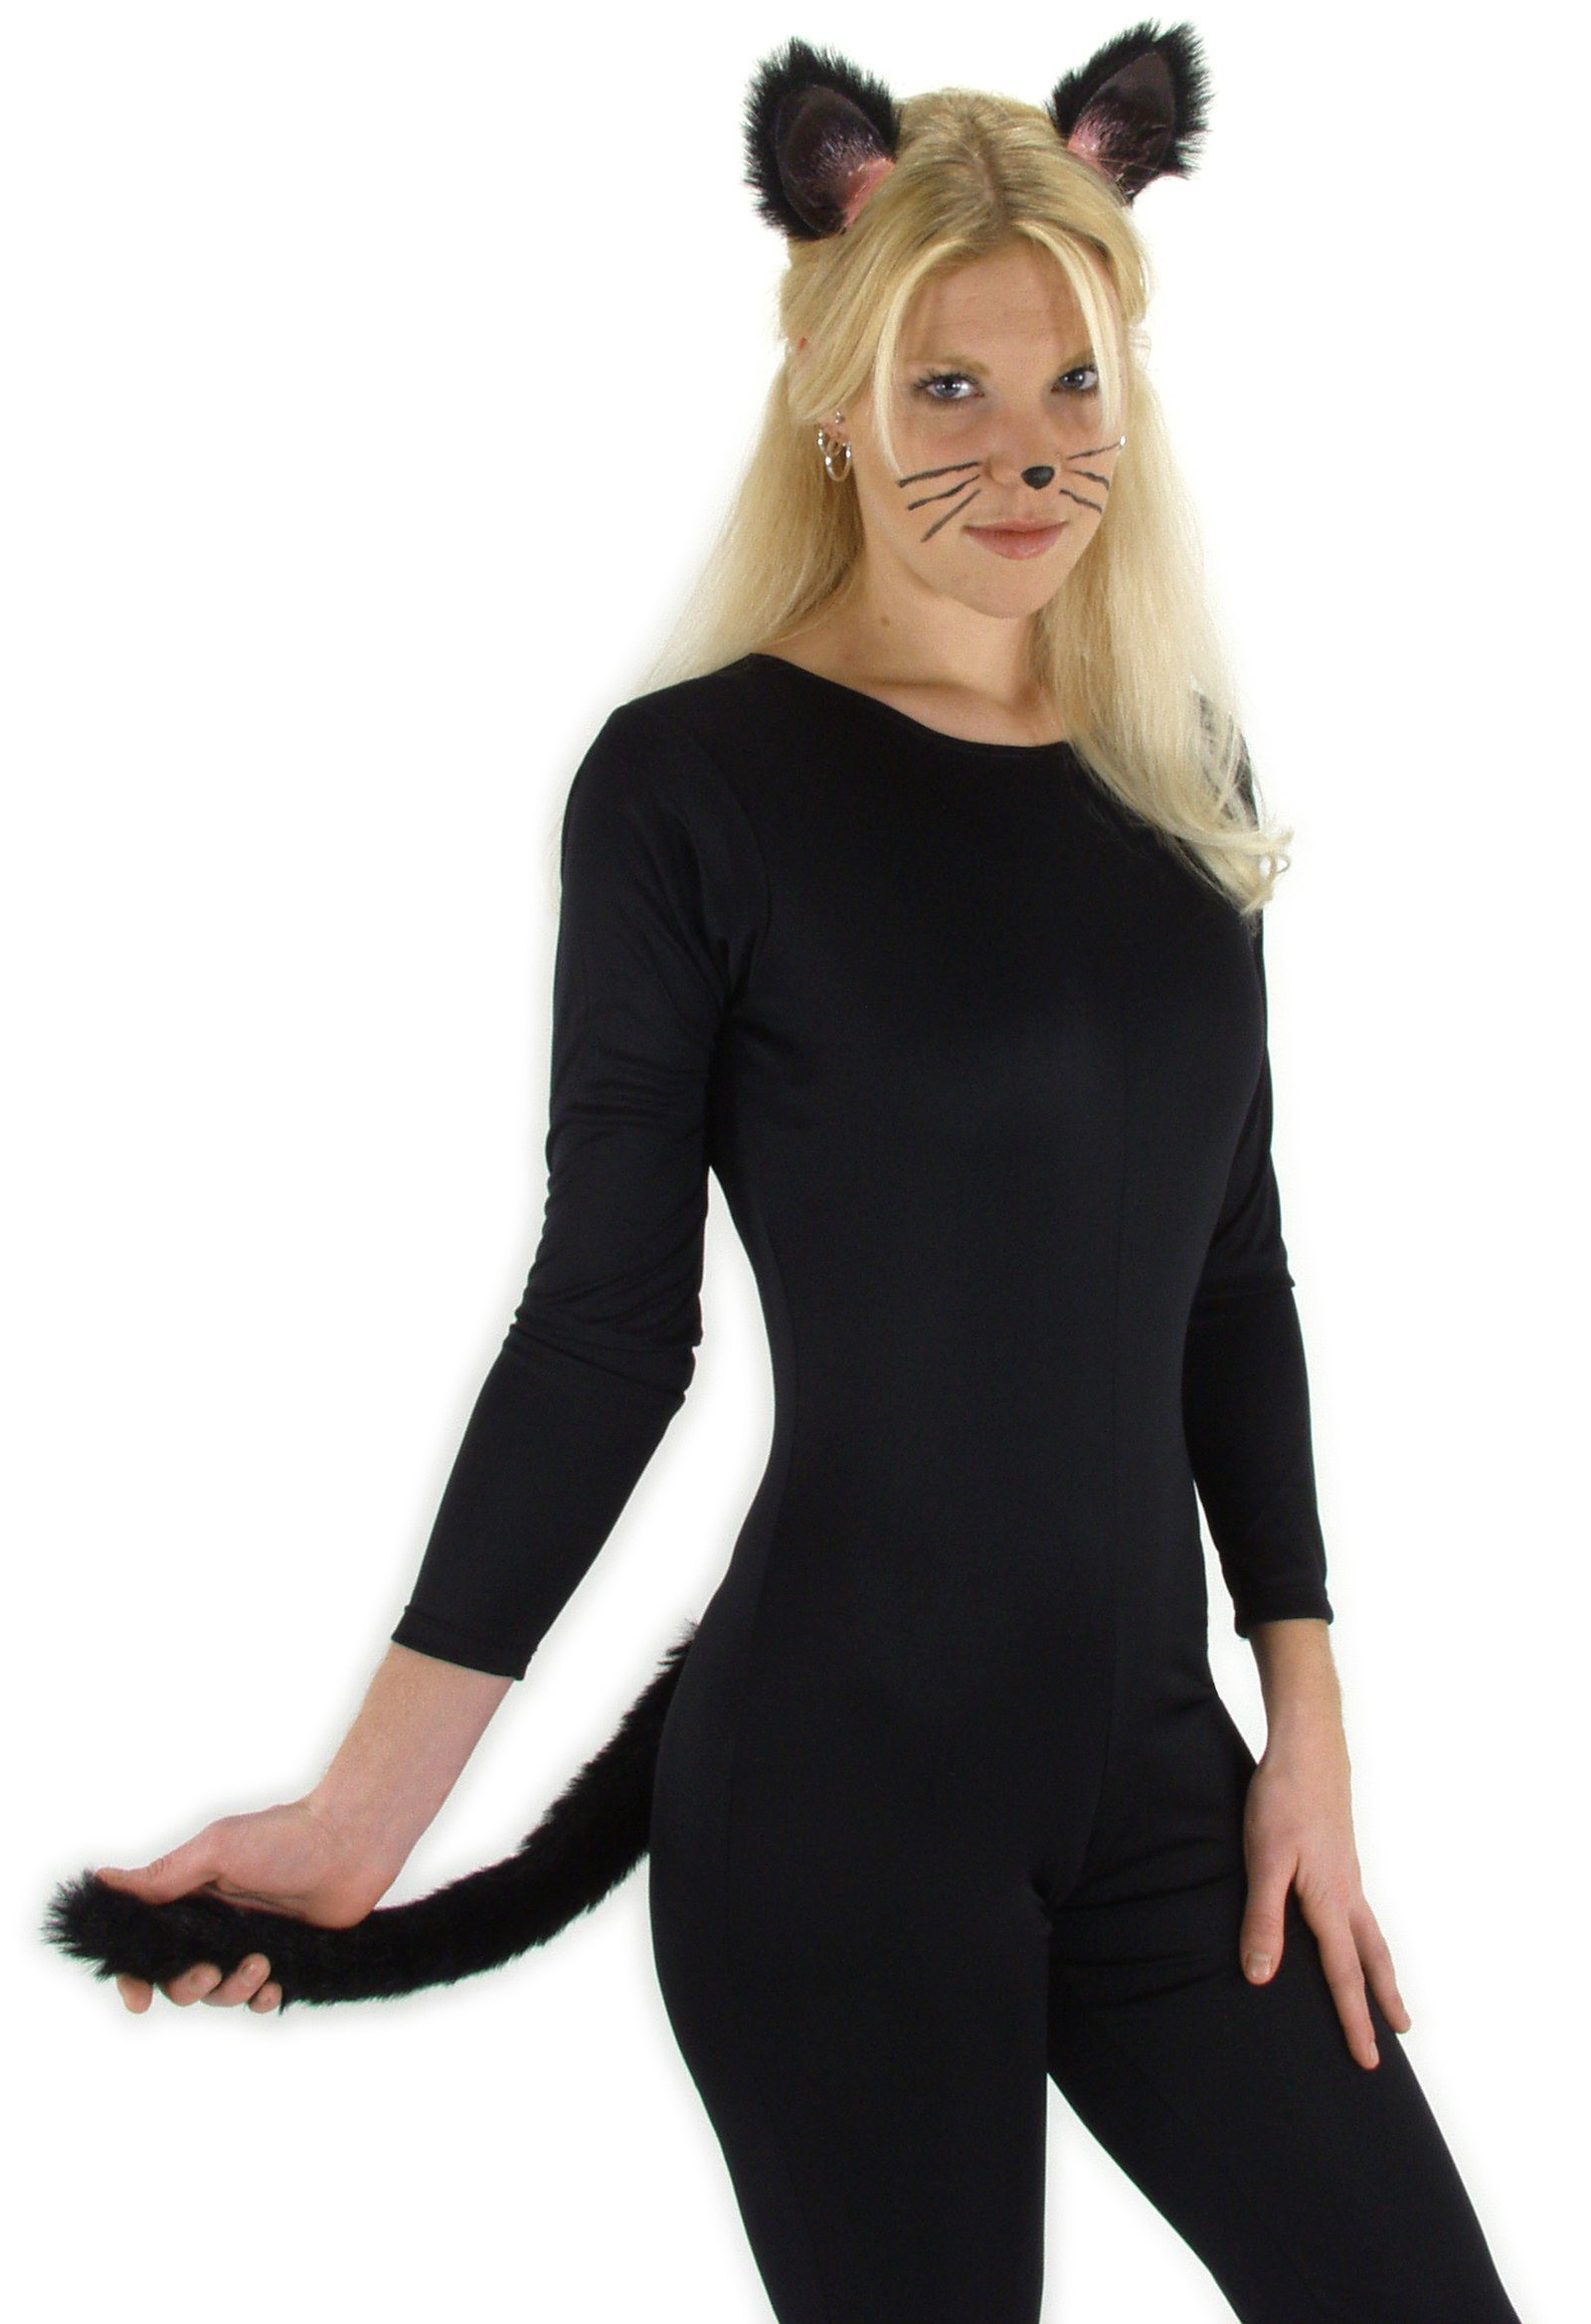 Cat DIY Costume
 Left Out of Group Costume Girl Decides to Dress Up as a